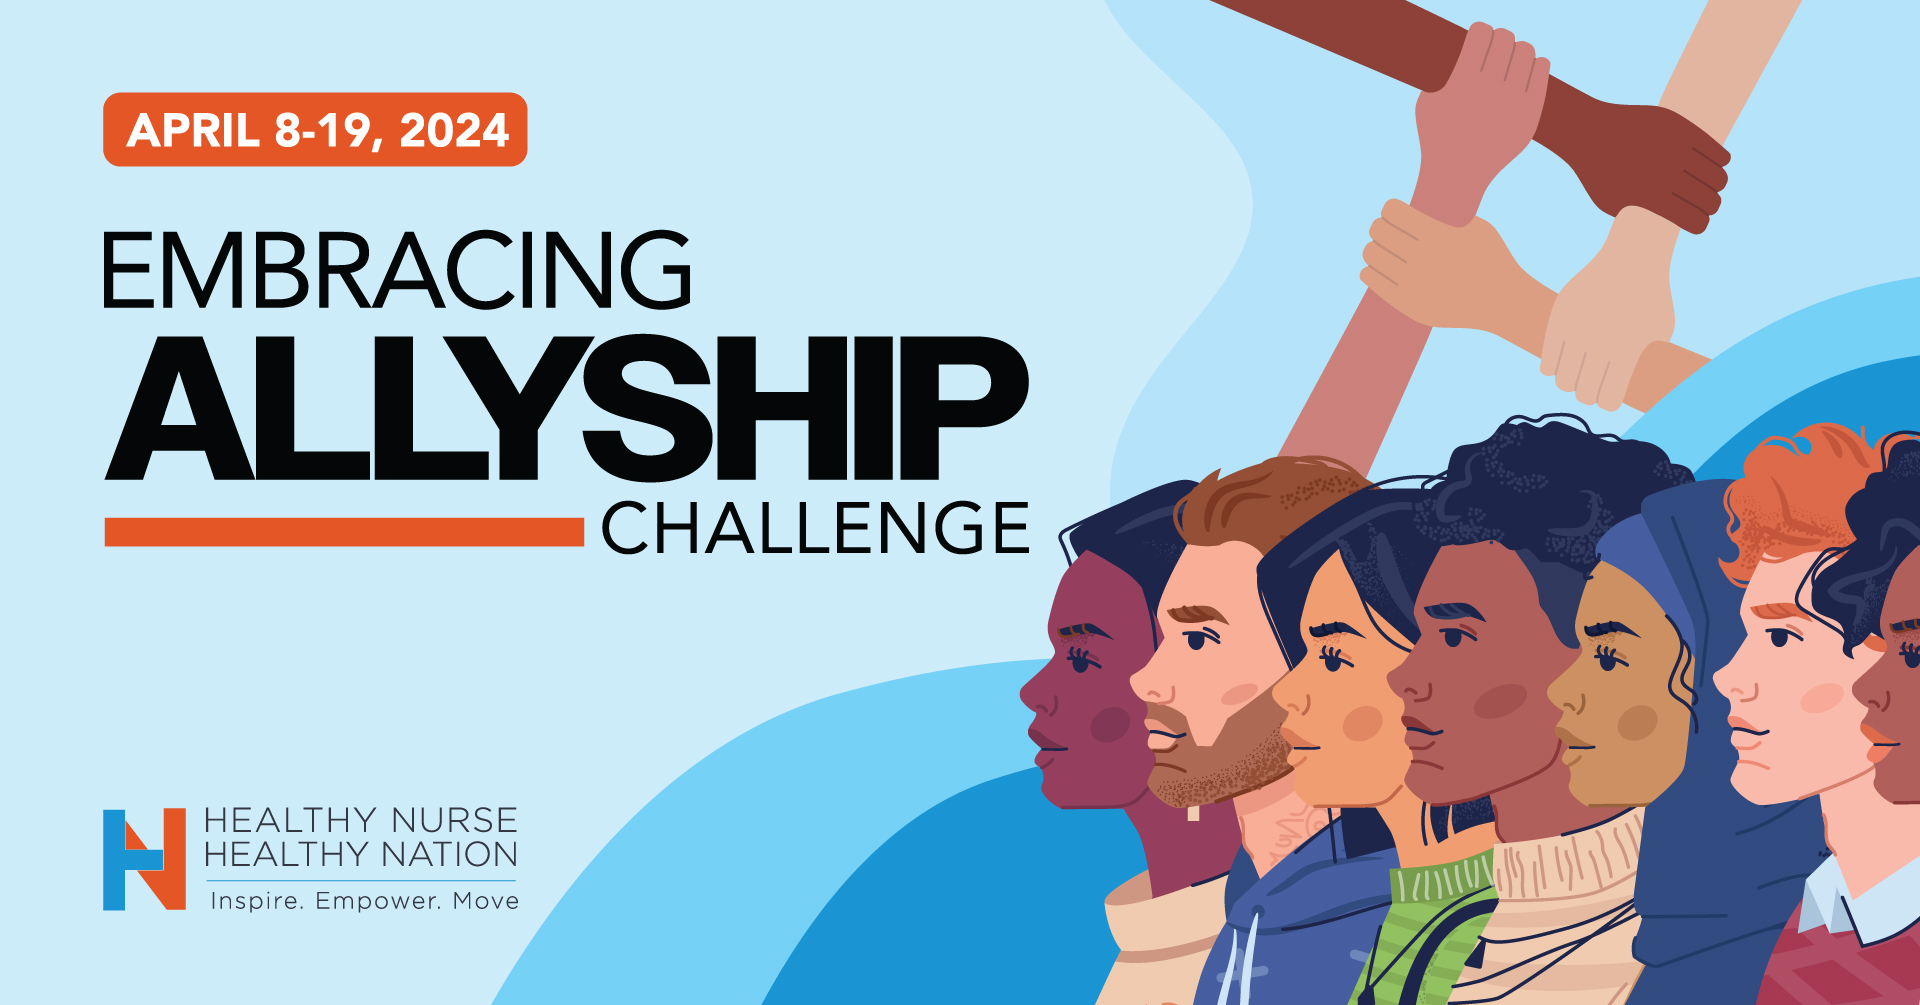 Start With Self-Reflection - Healthy Nurse, Healthy Nation - Embracing Allyship Challenge - Day 1 4729